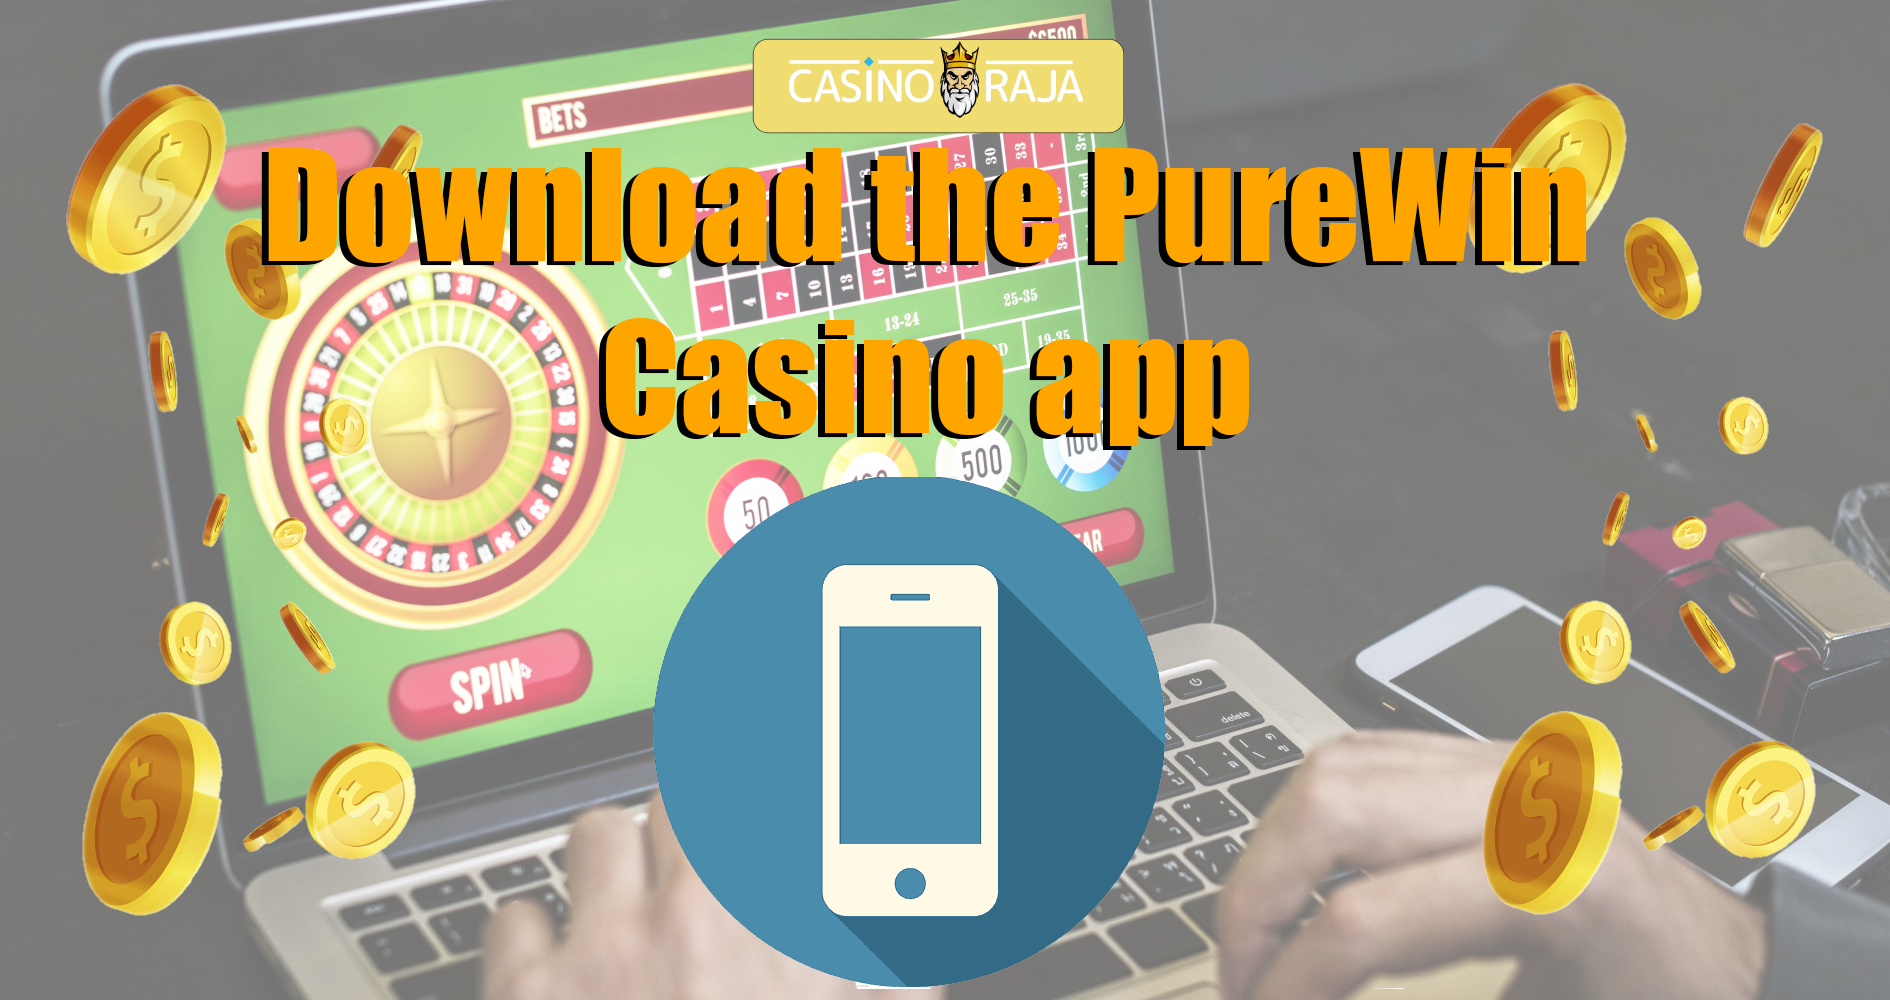 How to download and install Purewin apk on the smartphone.